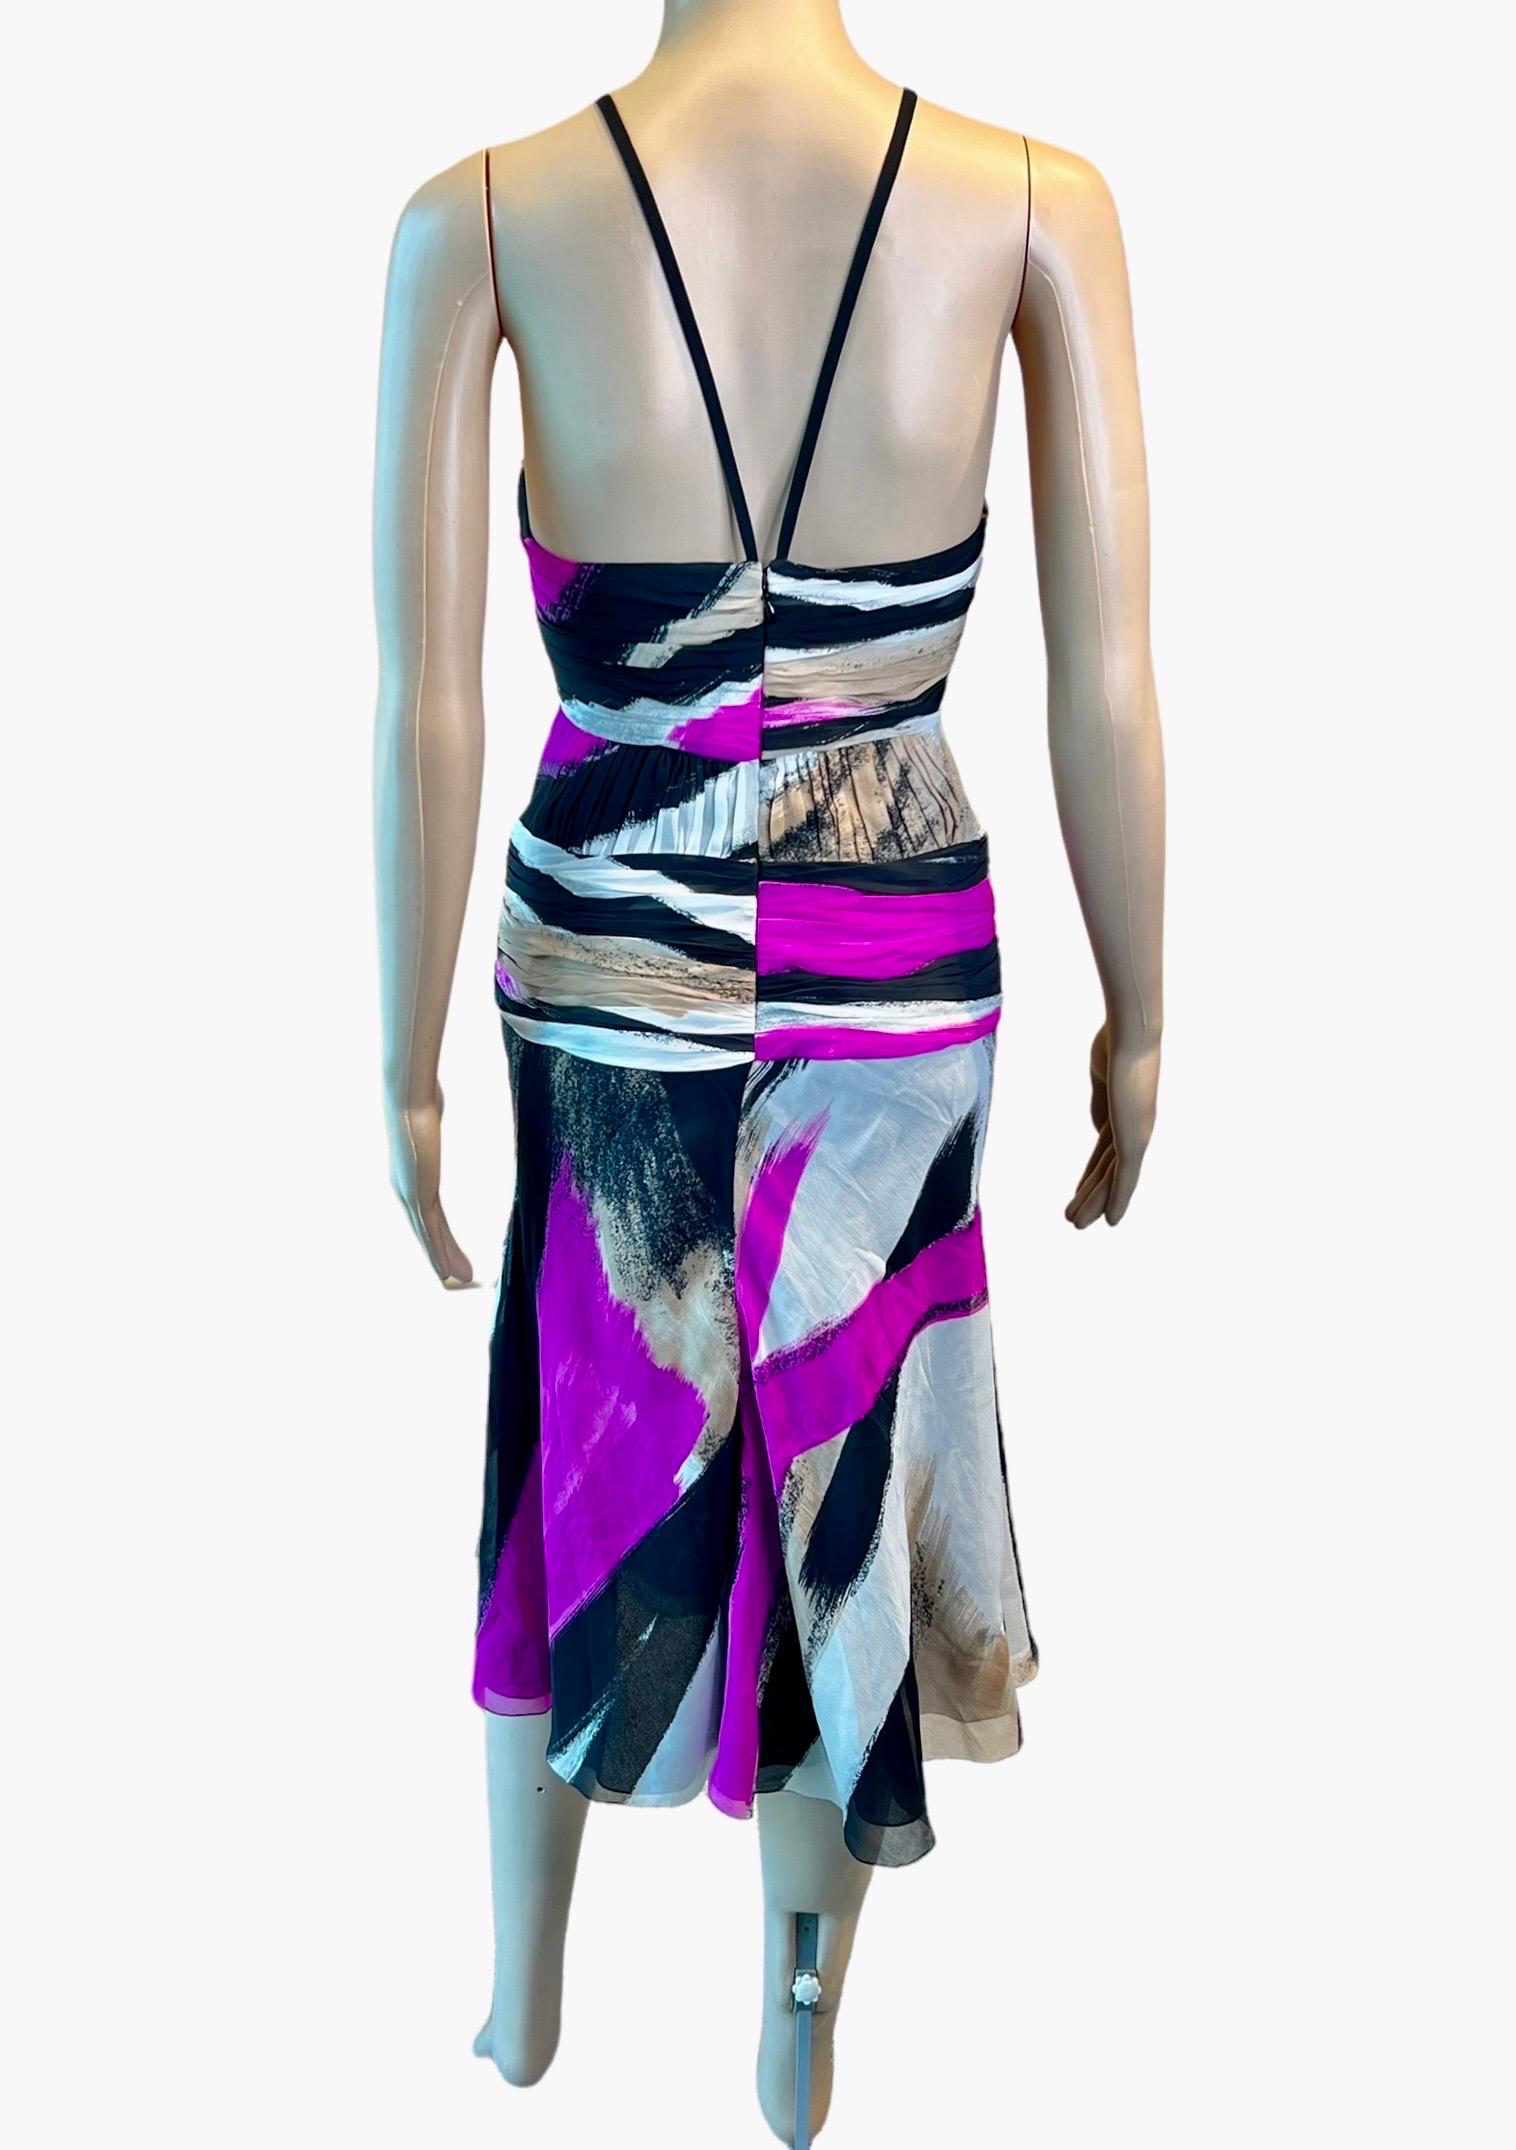 Gianni Versace F/W 2001 Runway Plunging Neckline Geometric Abstract Print Dress For Sale 1